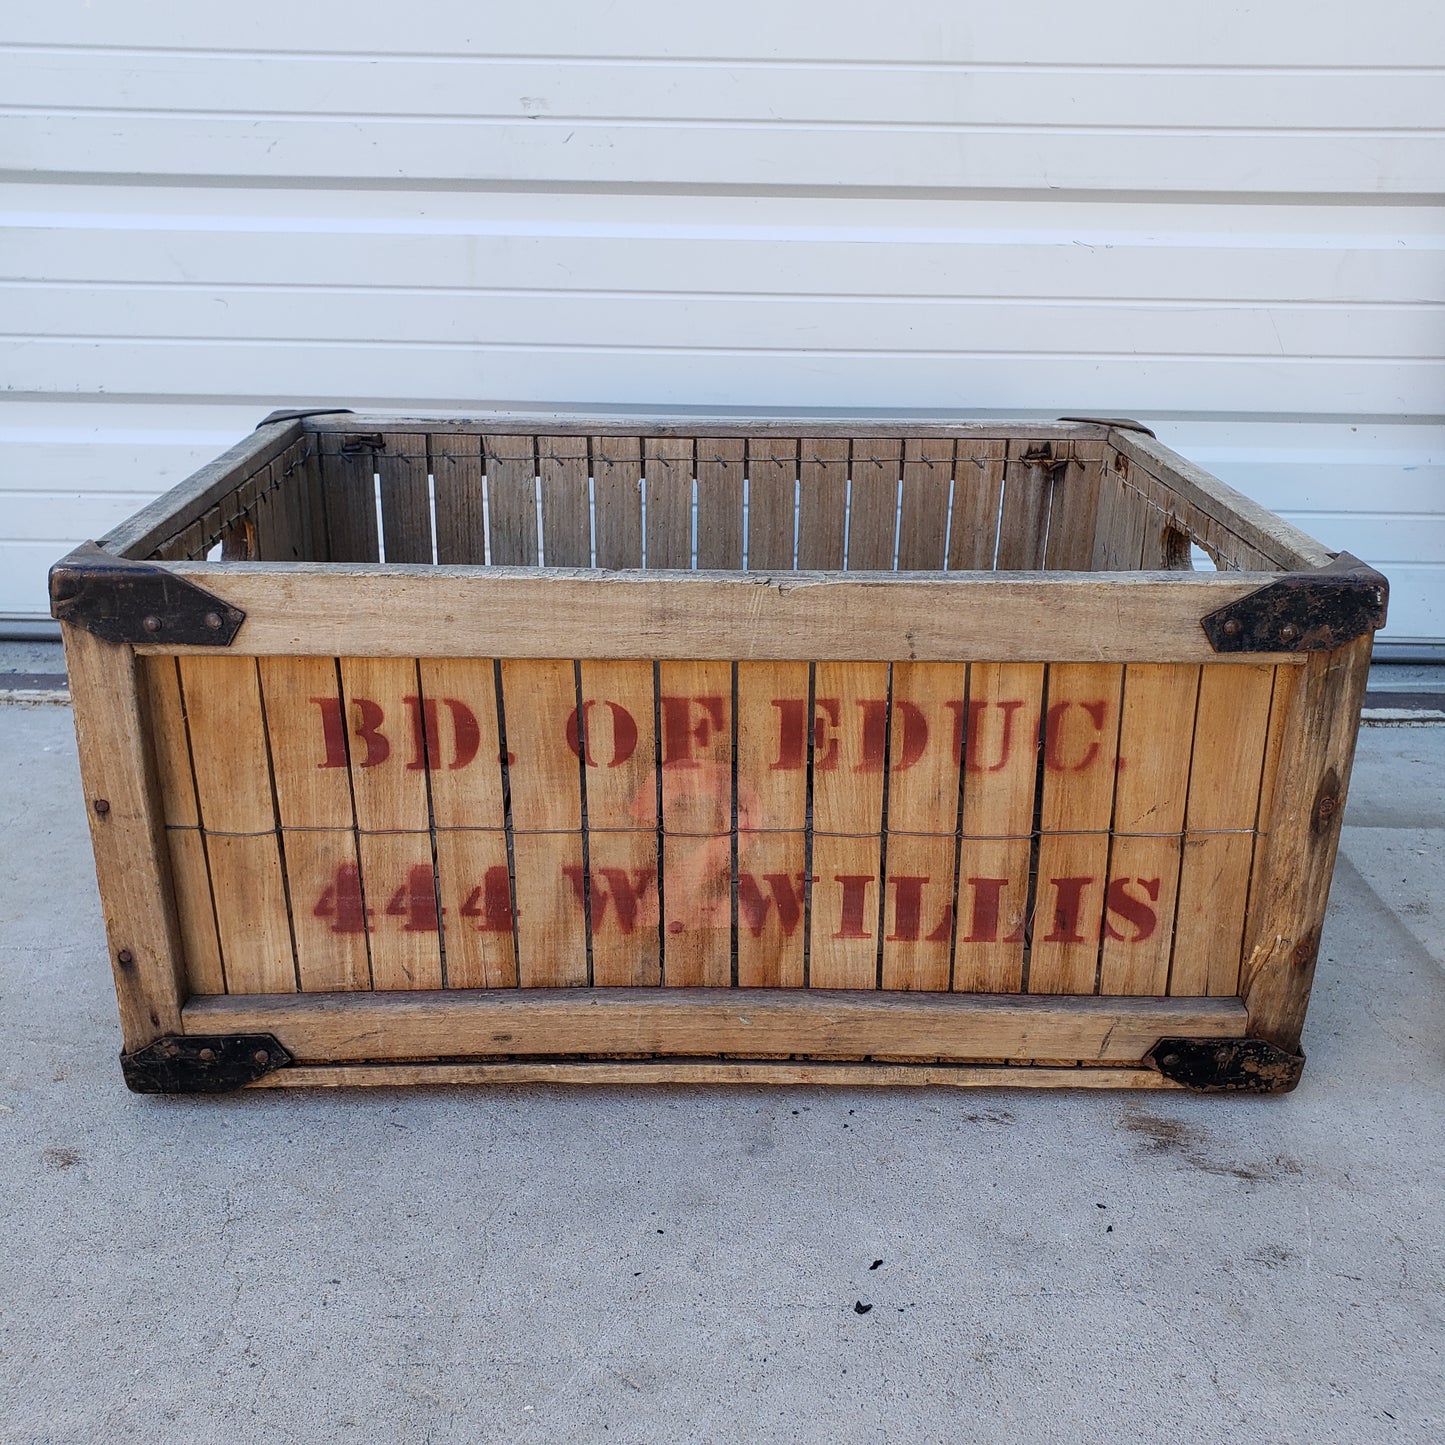 "Board of Education" Wooden Crate